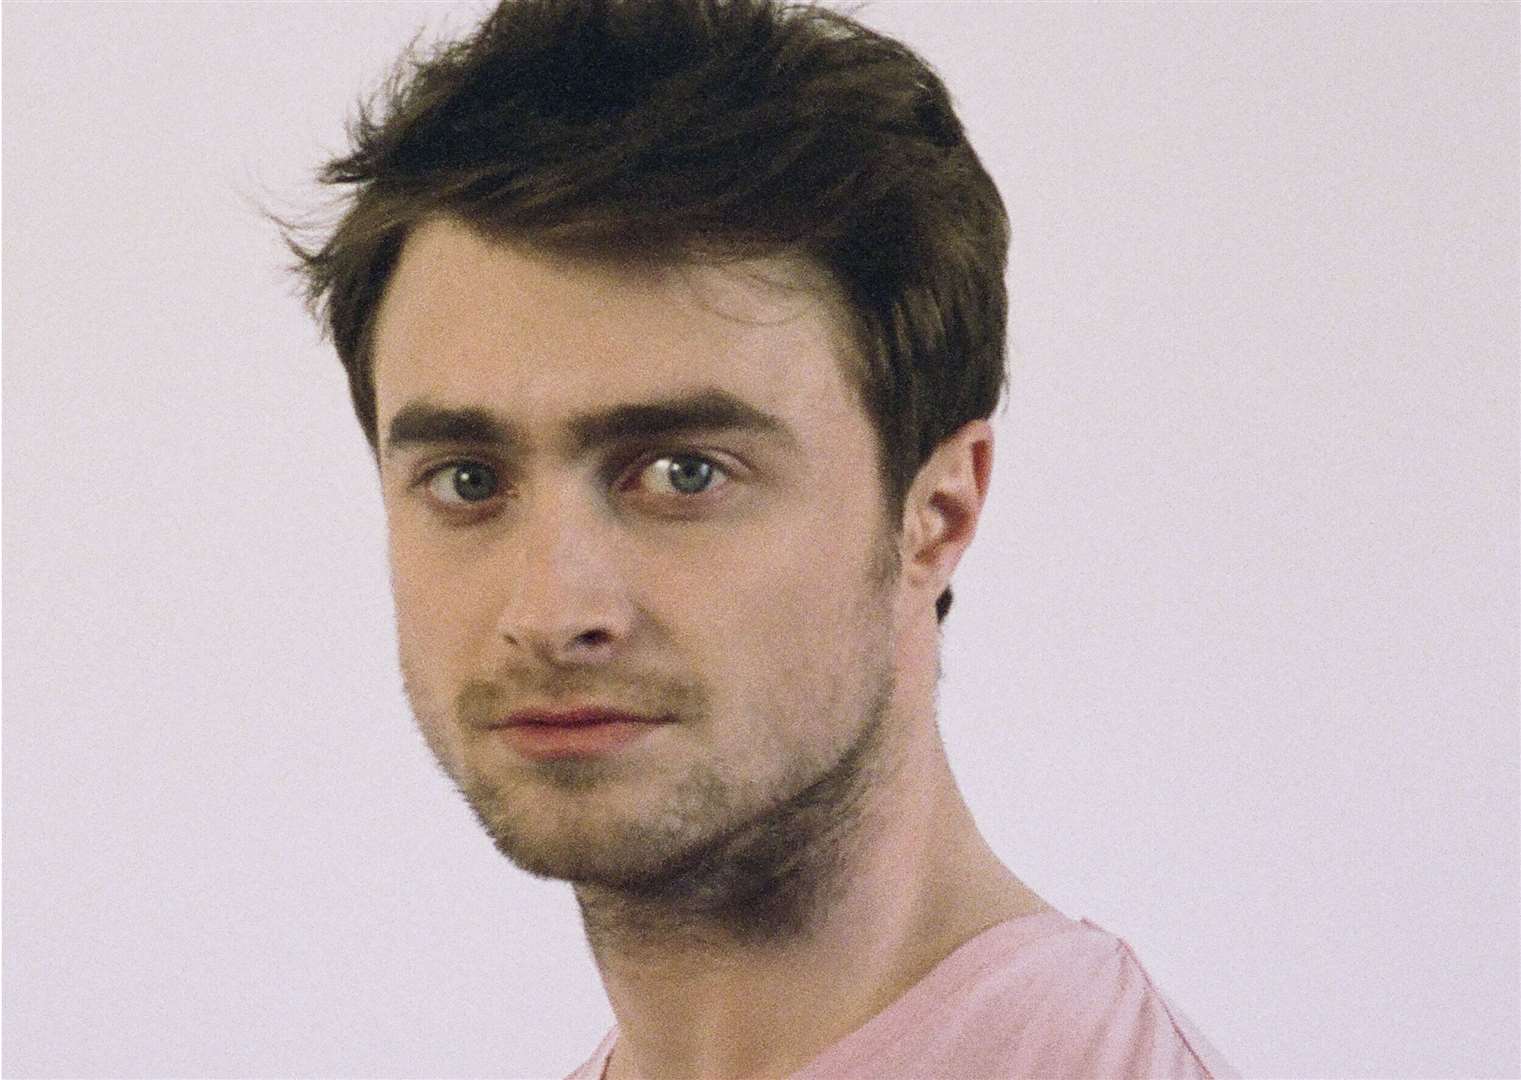 Harry Potter star Daniel Radcliffe is one of the Demelza's vice presidents